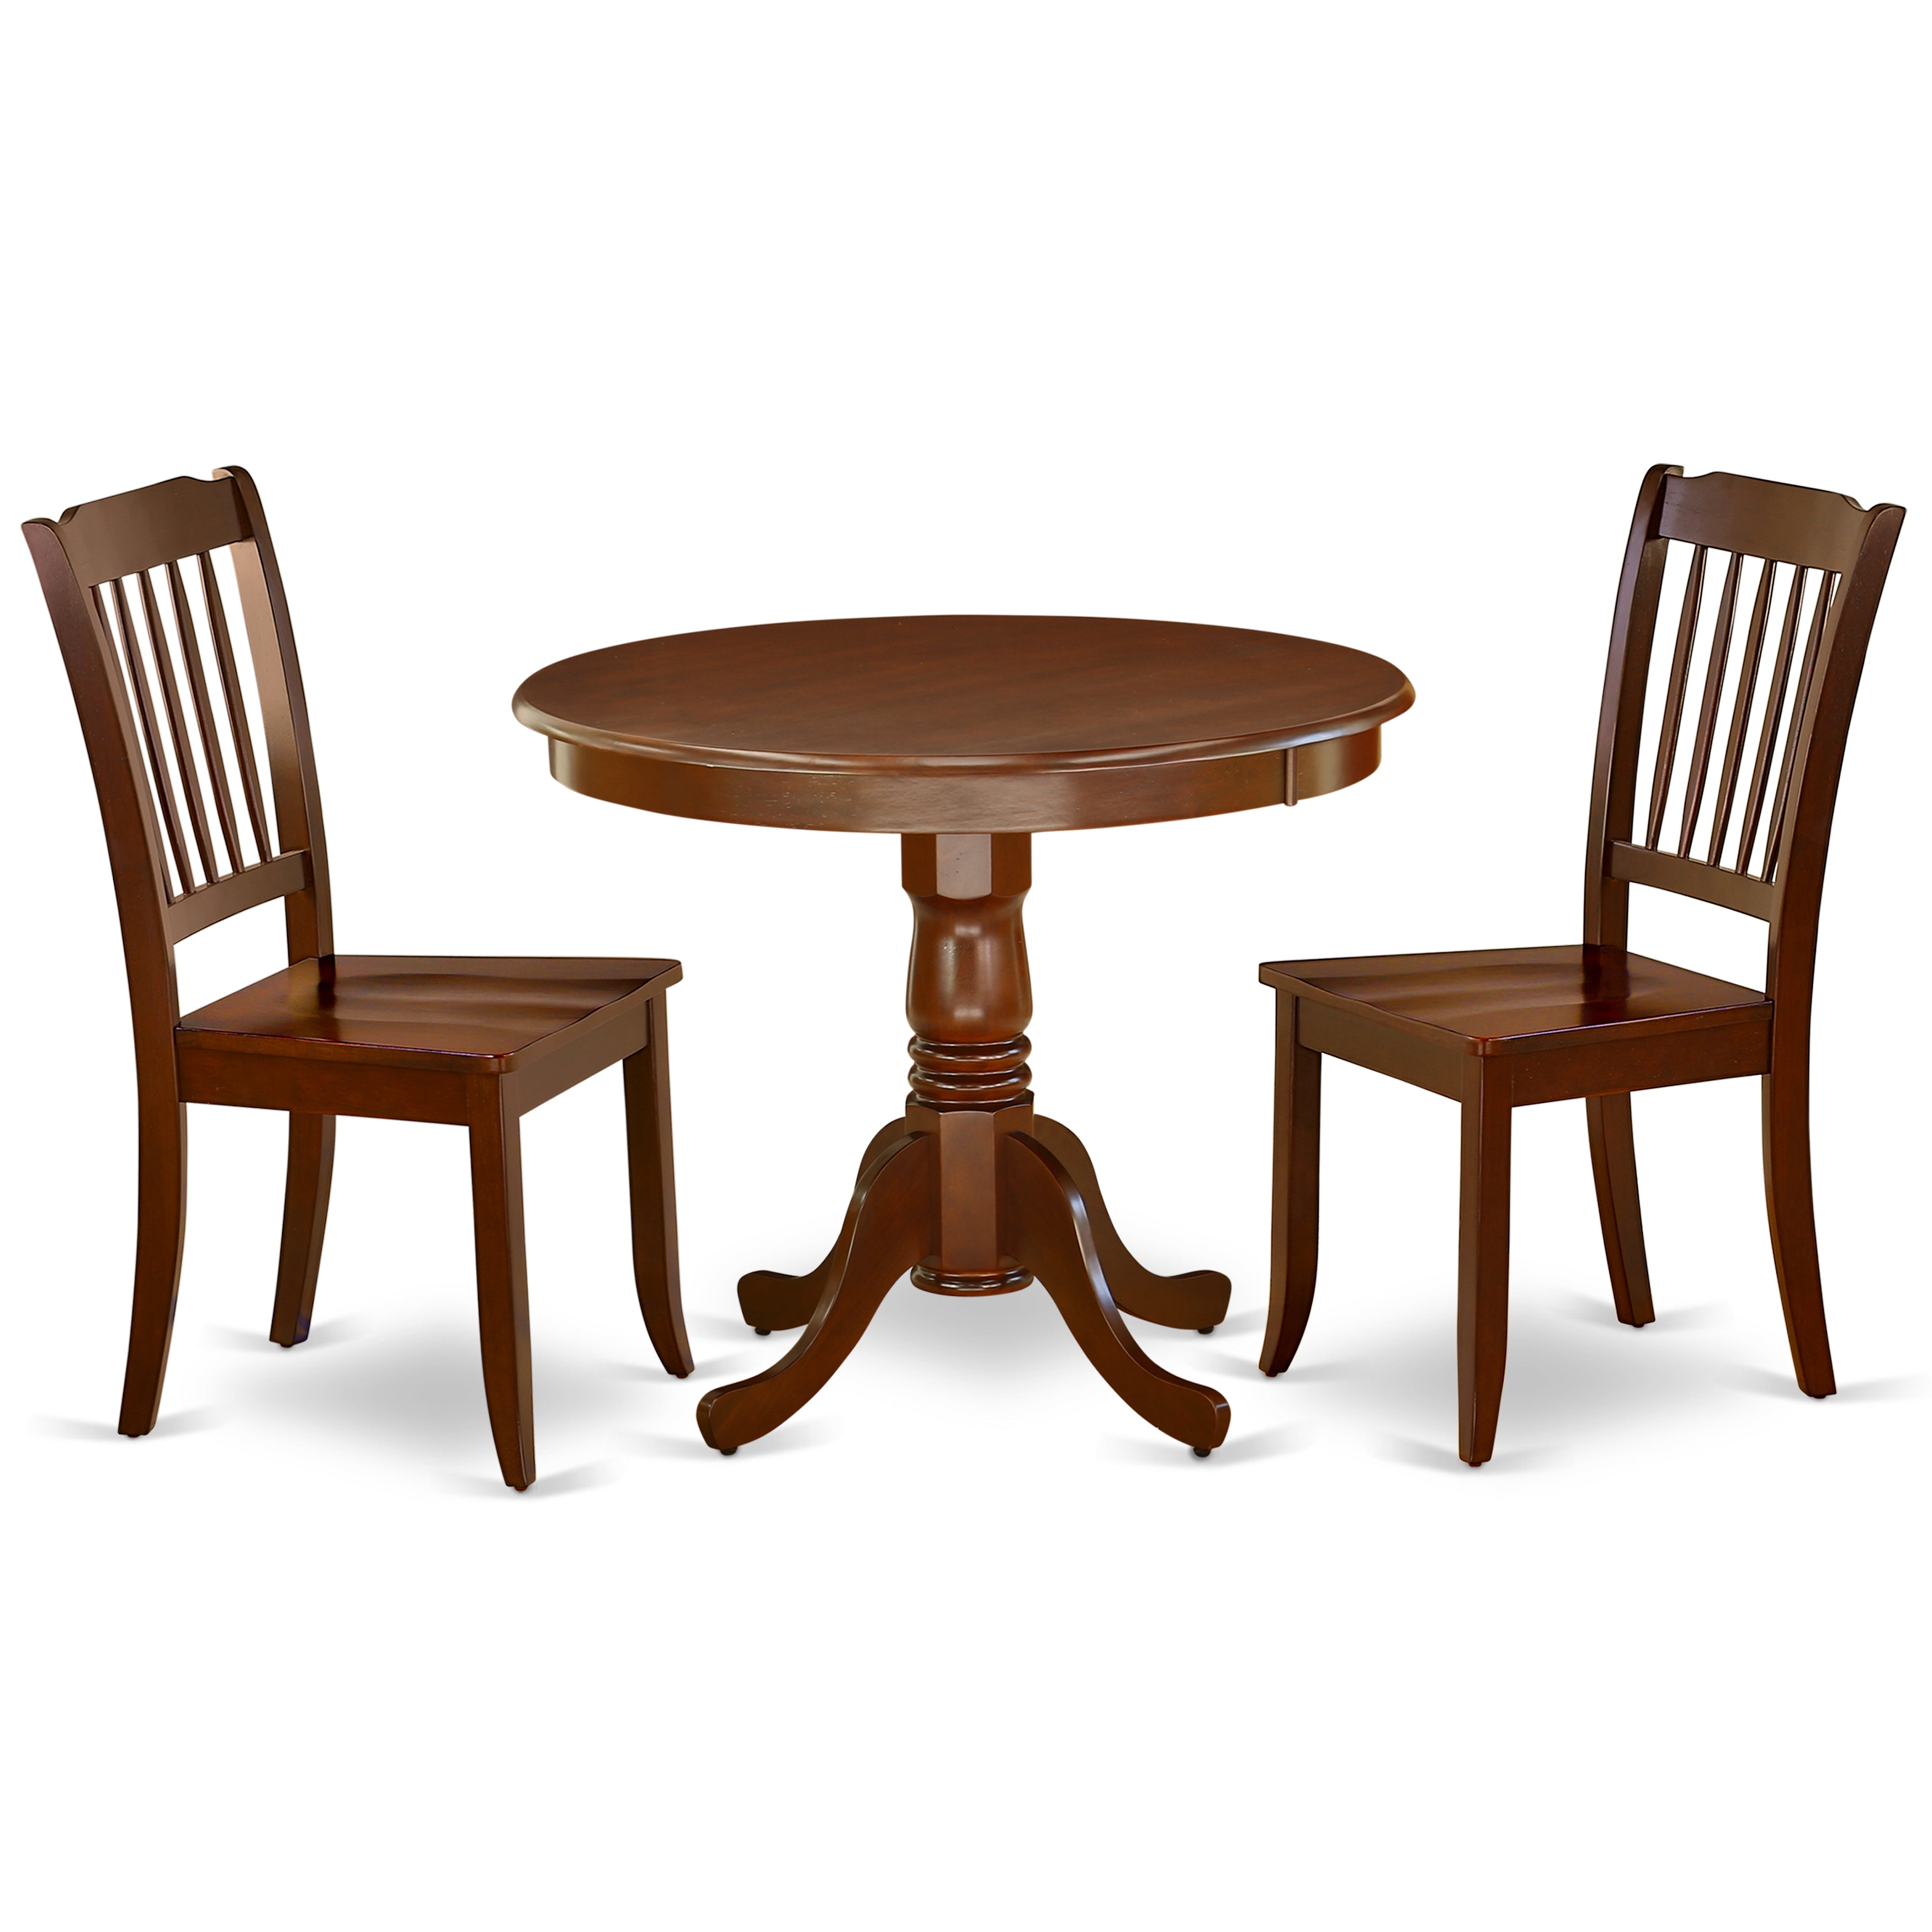 ANDA3-MAH-W 3PC Round 36 inch Table and 2 vertical slatted Chairs